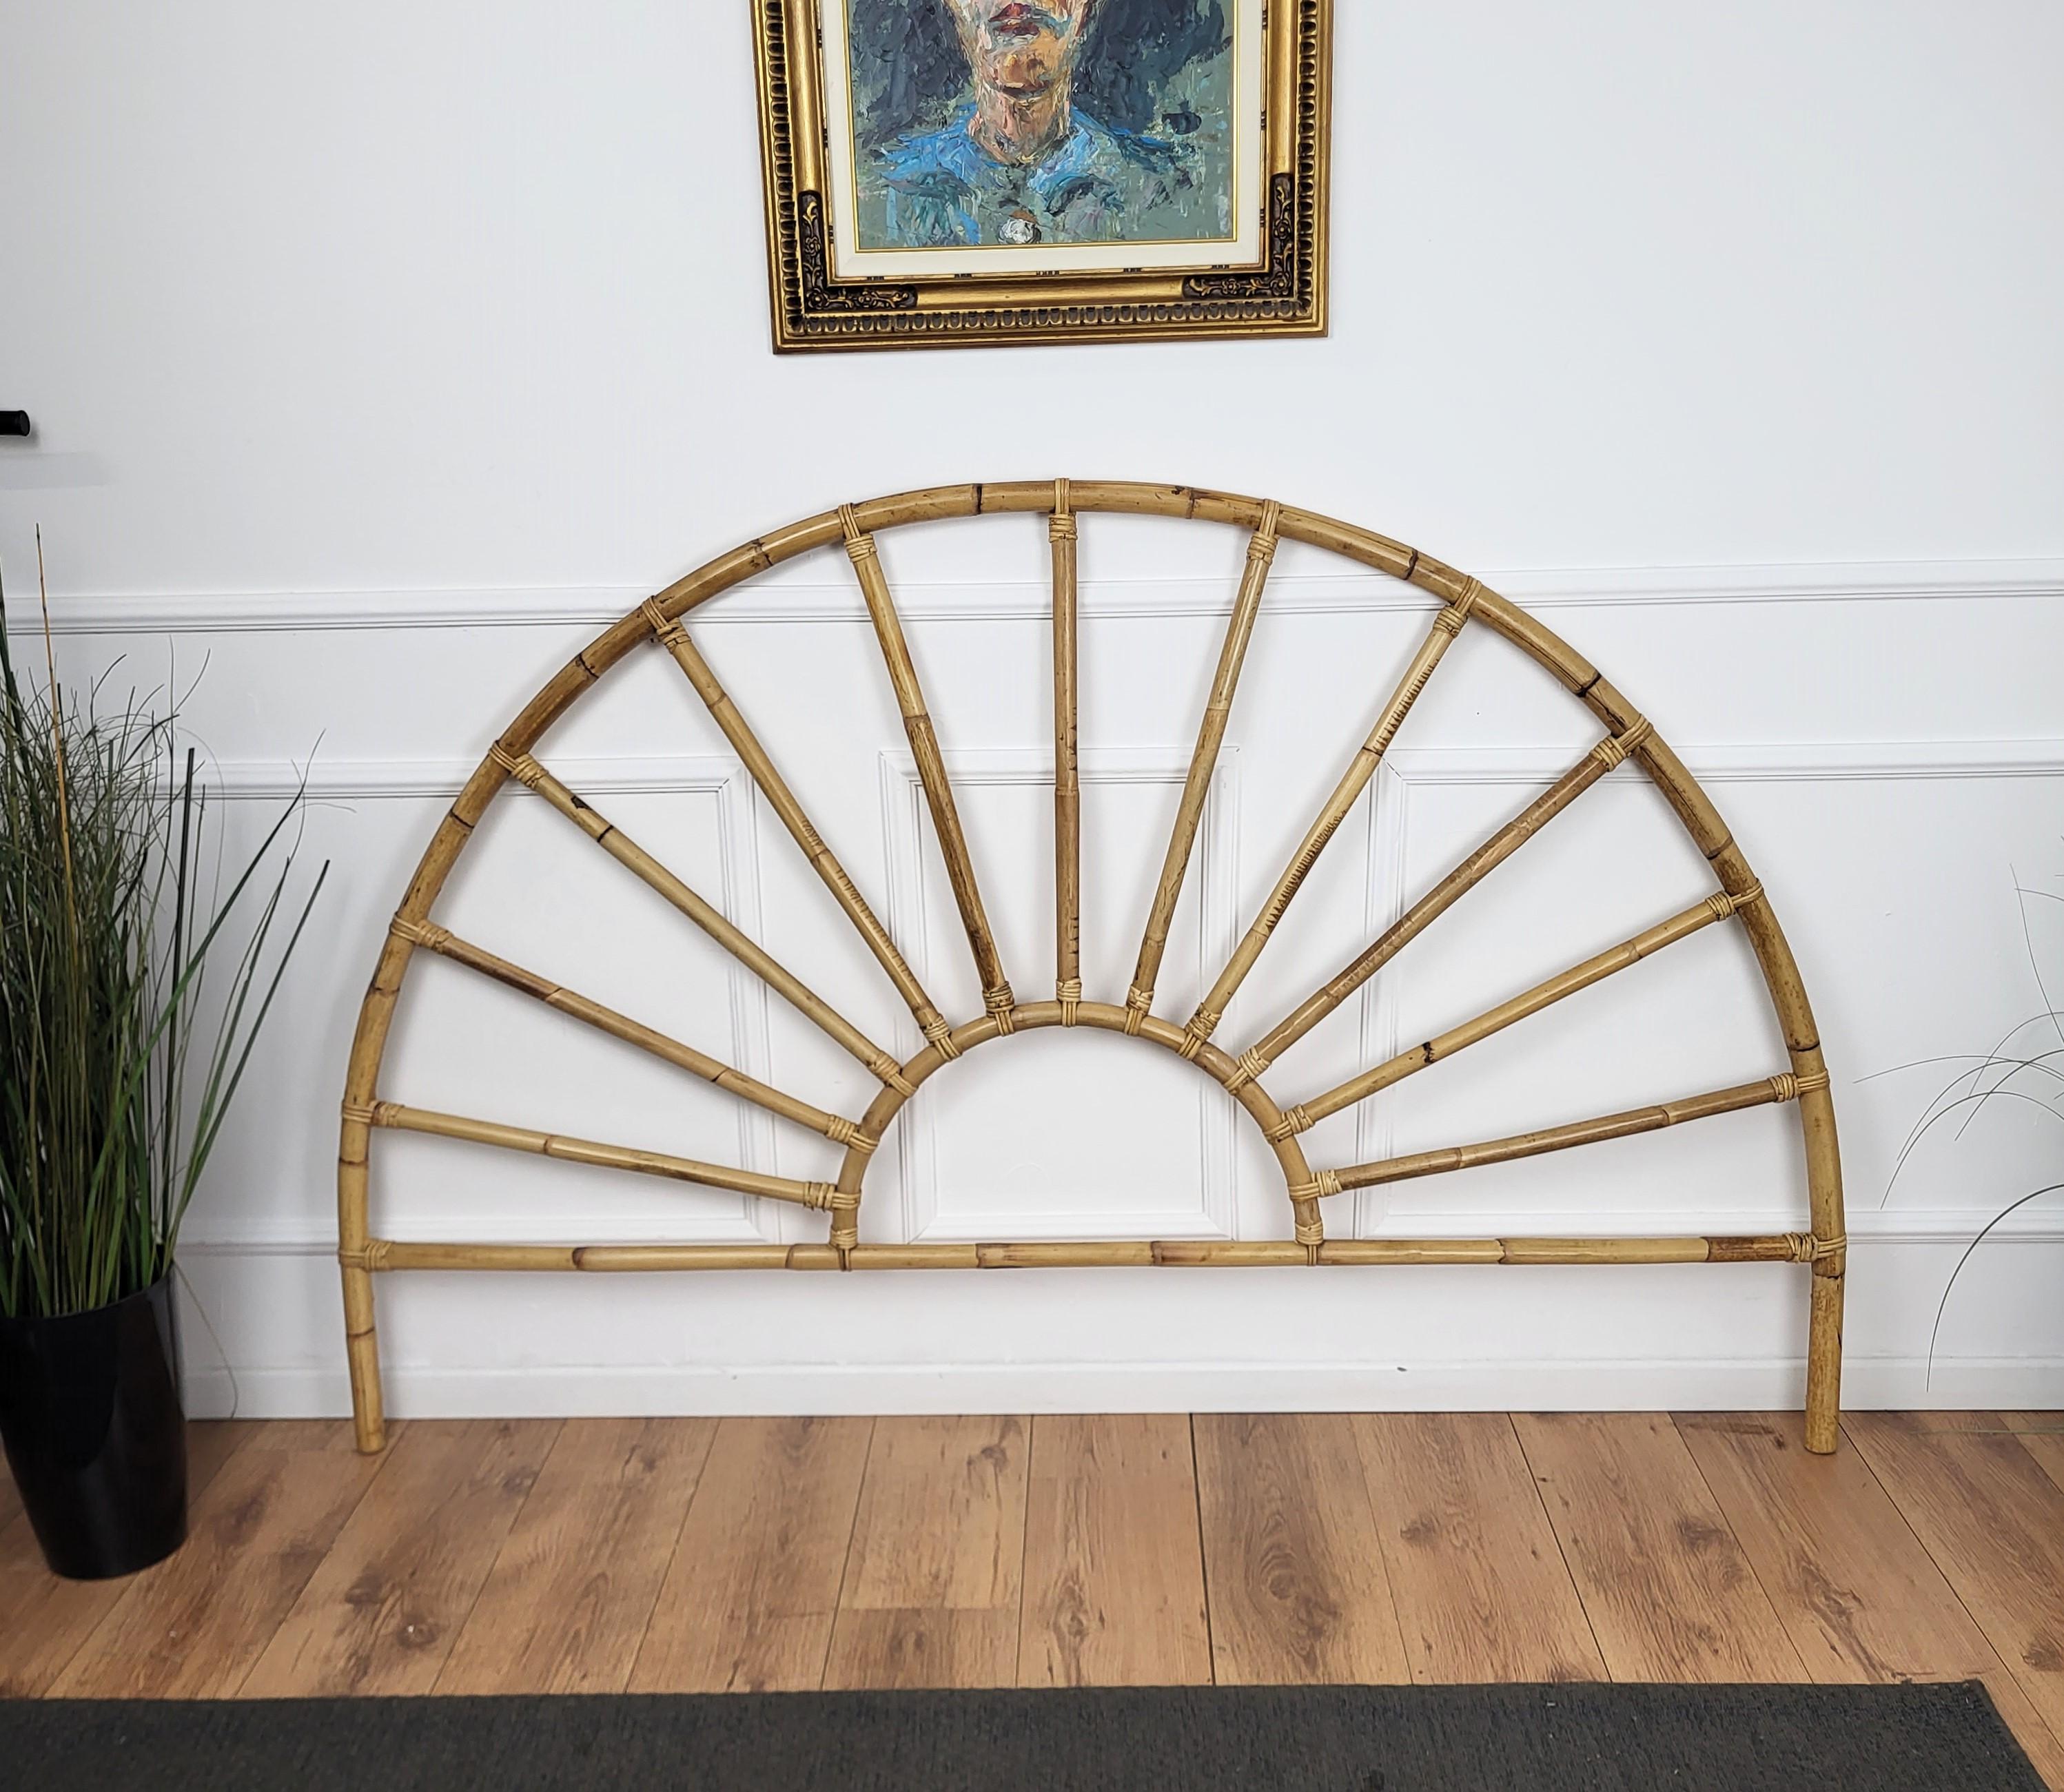 Beautiful 1970s Italian Mid-Century Modern curved sunrise shaped wall bed frame headboard made of rattan and bamboo. This charming piece is in the typical style of Franco Albini, Adrien Audoux and Vittorio Bonacina where the organic beauty of the